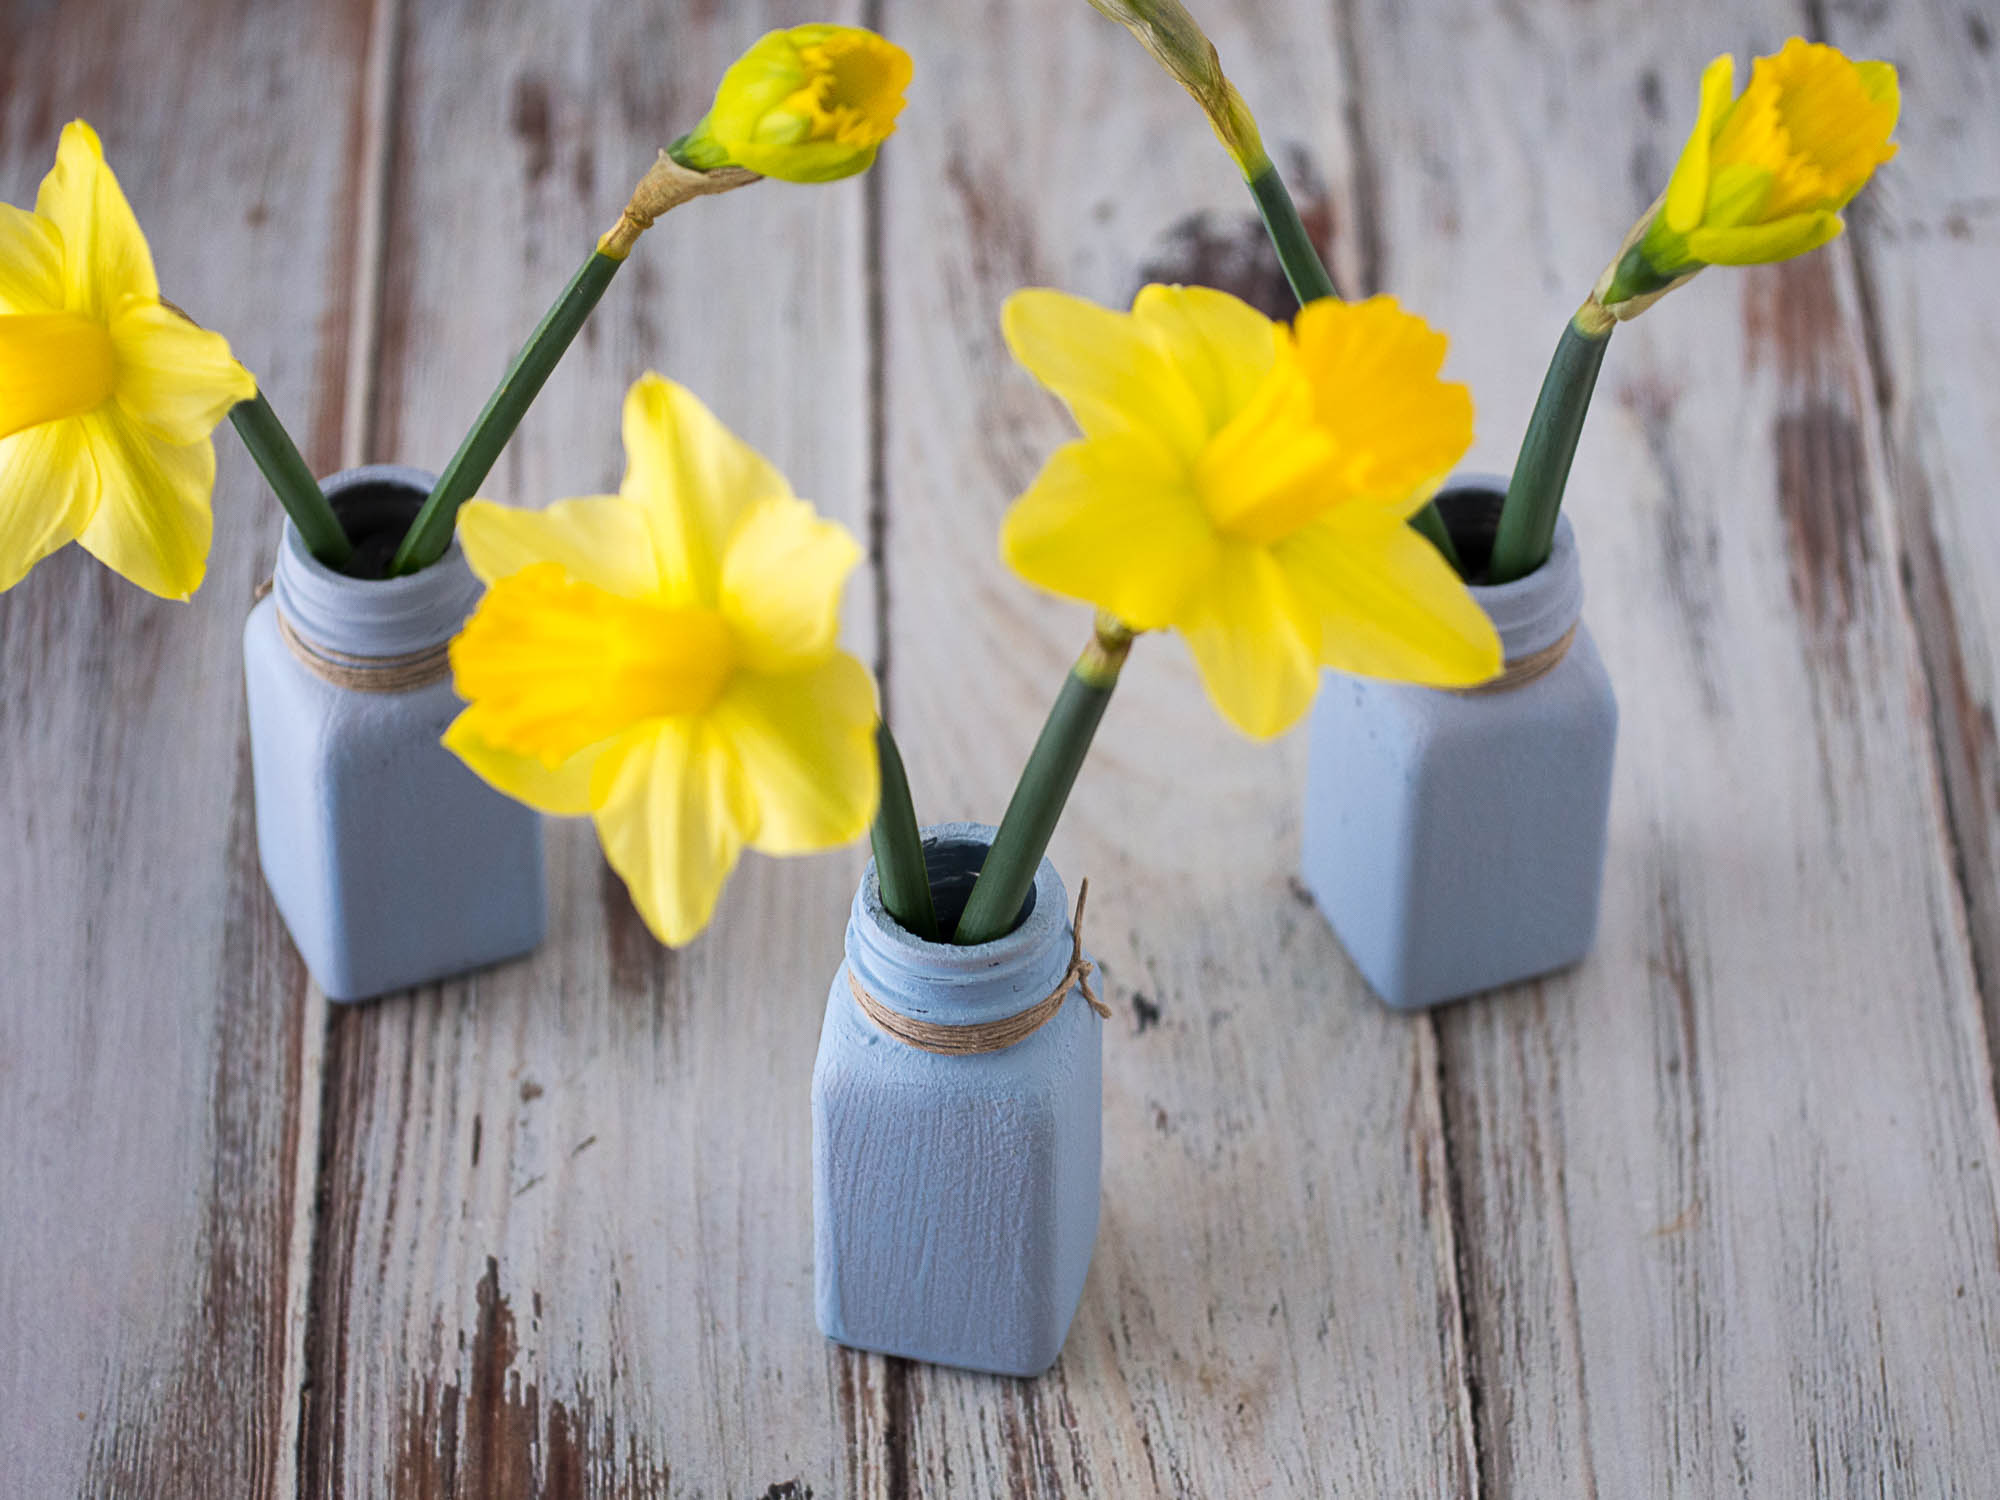 bud vases with daffodils